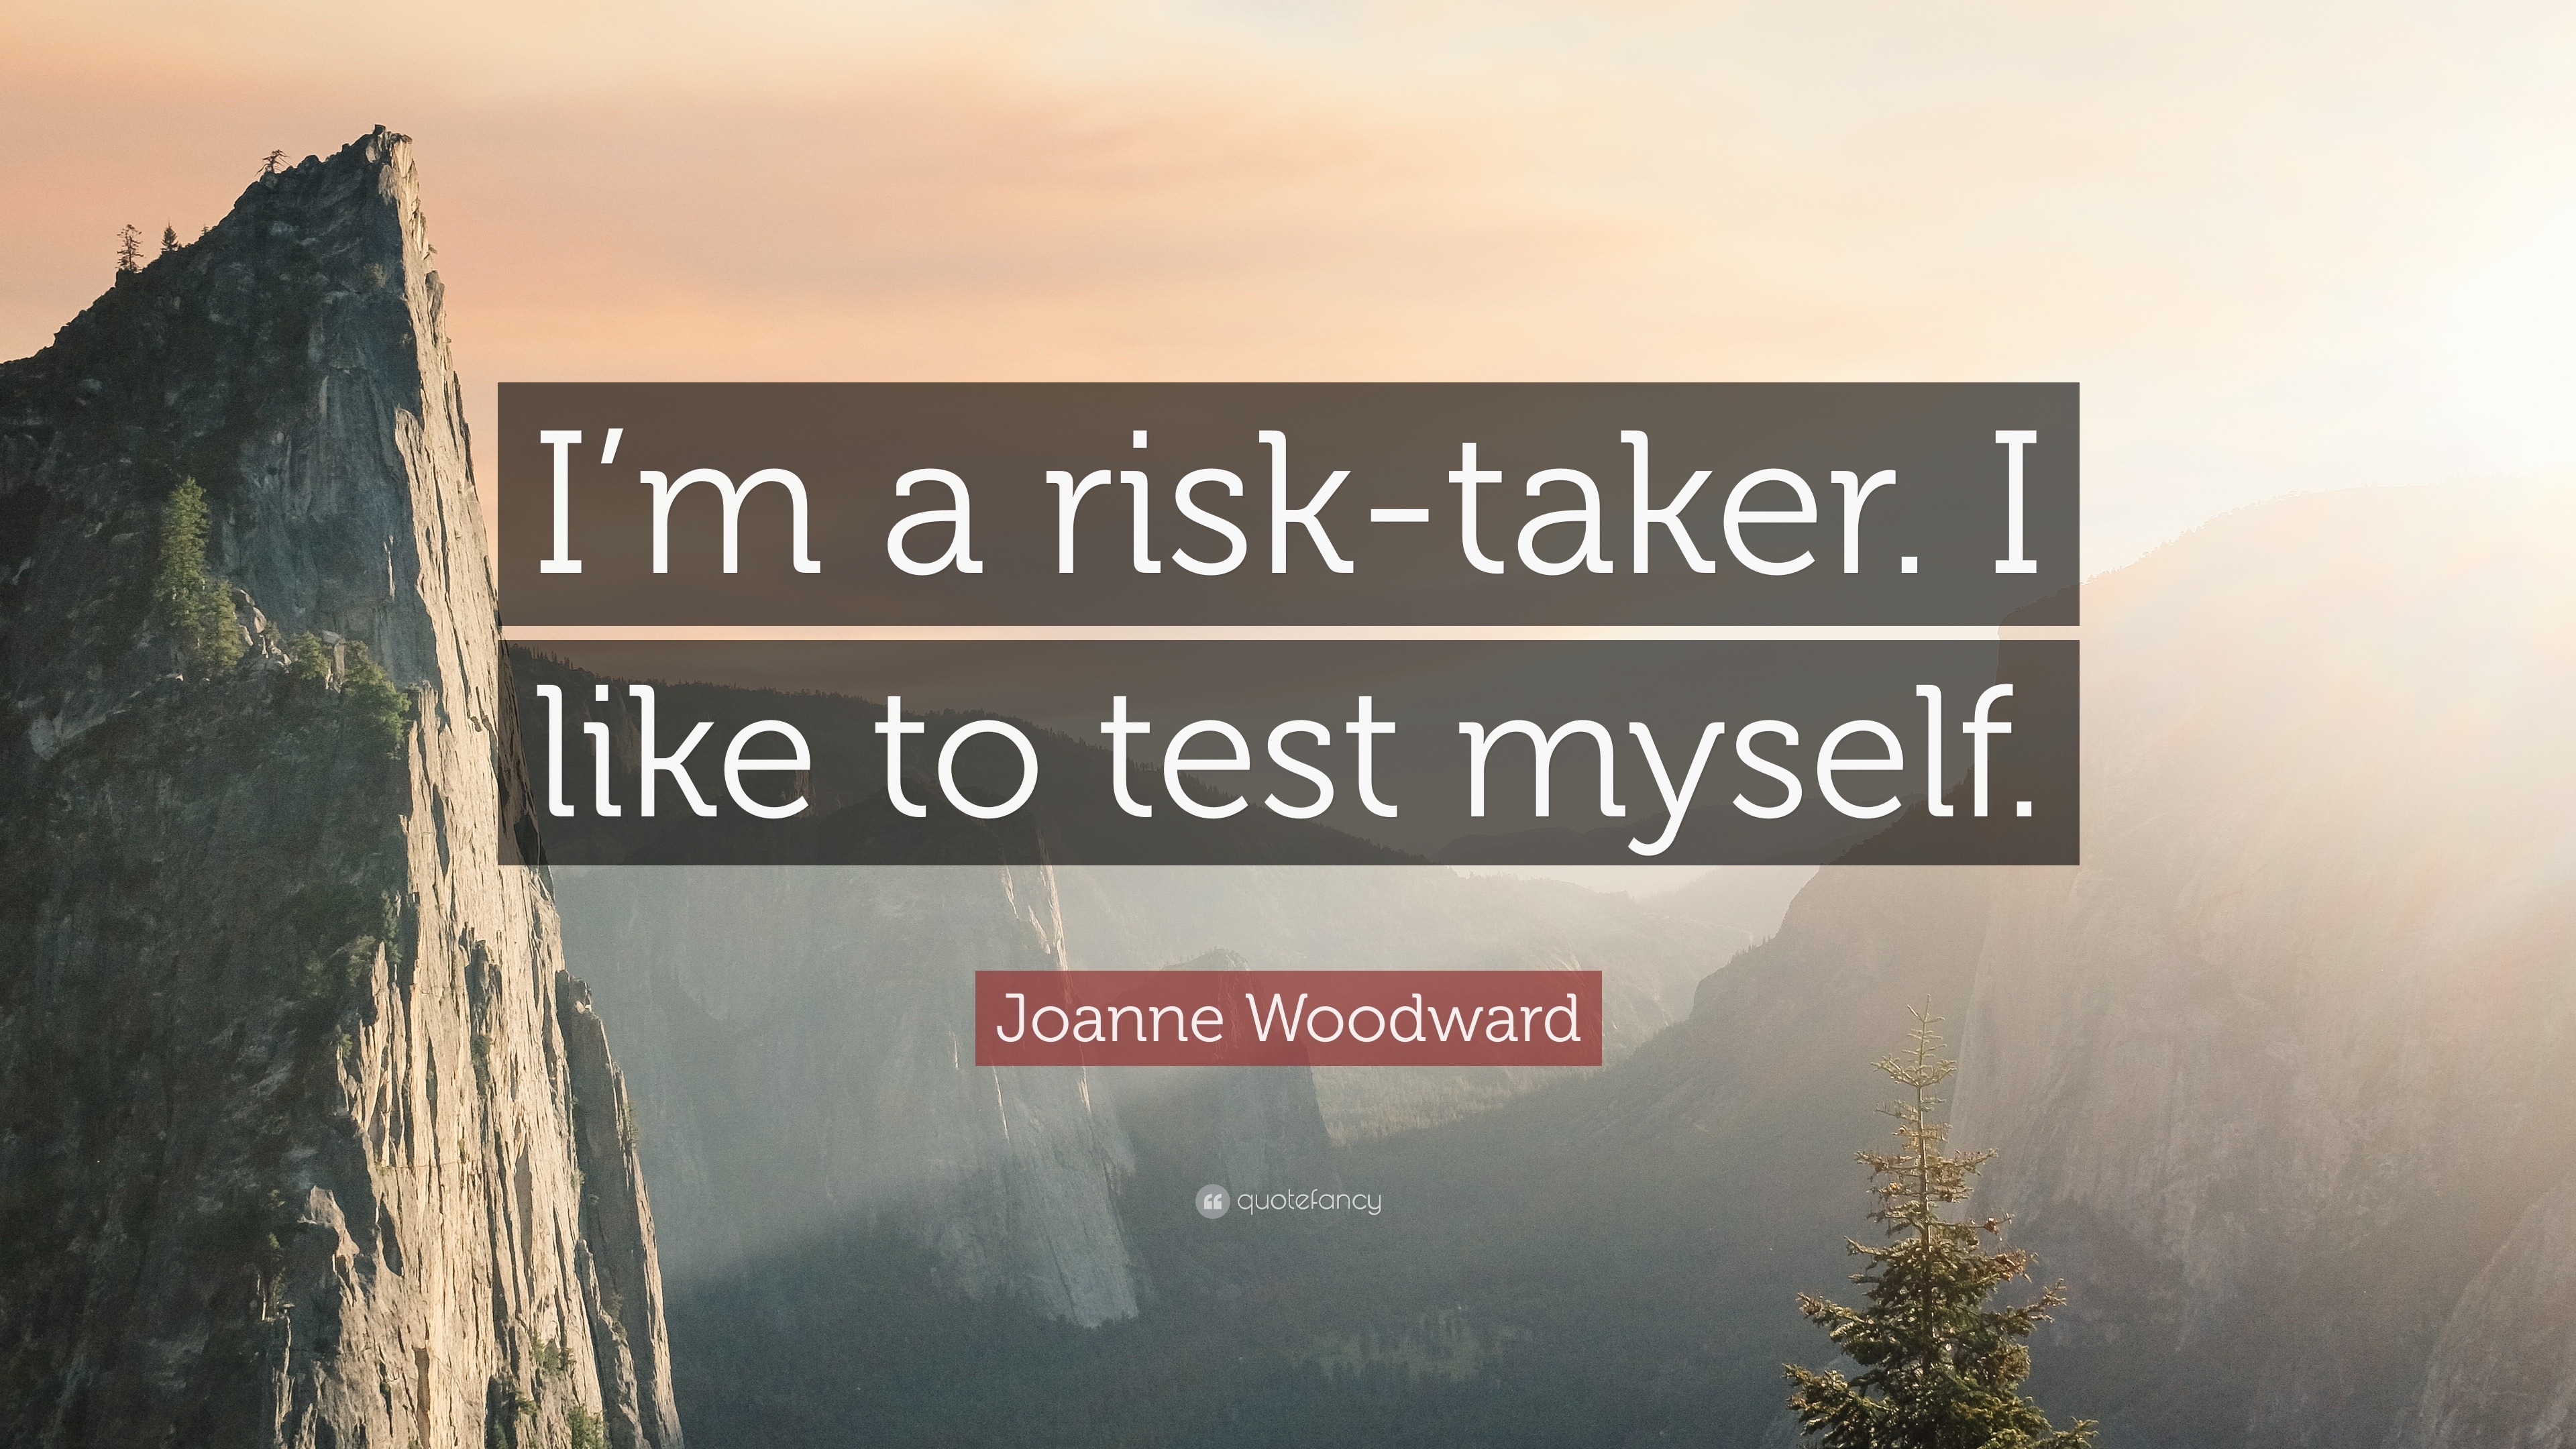 Joanne Woodward Quotes (15 wallpapers